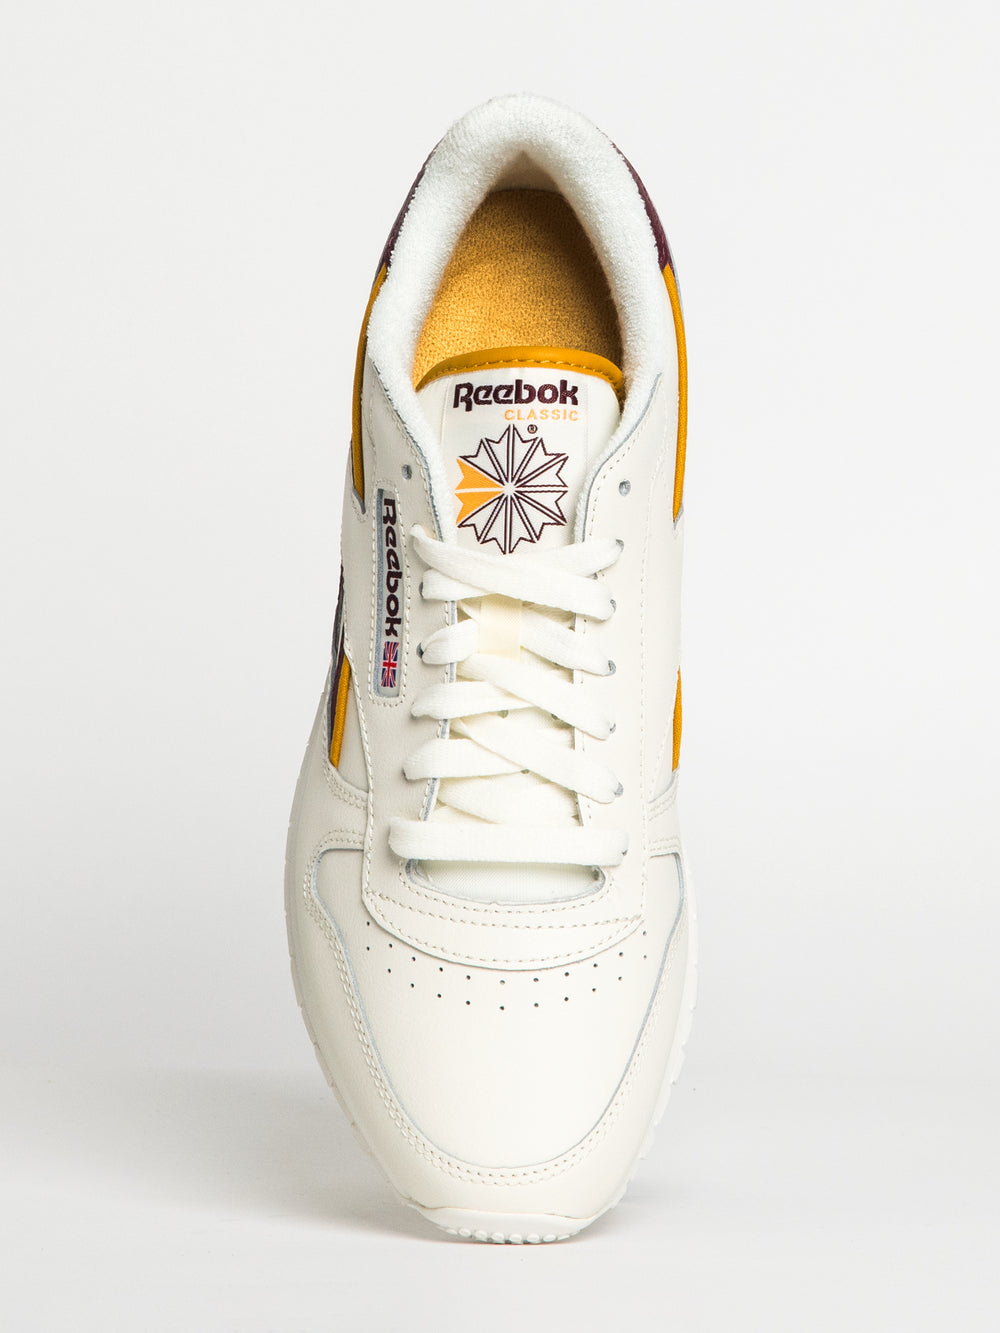 MENS REEBOK CLASSIC Footwear LEATHER | Collective SNEAKER Boathouse